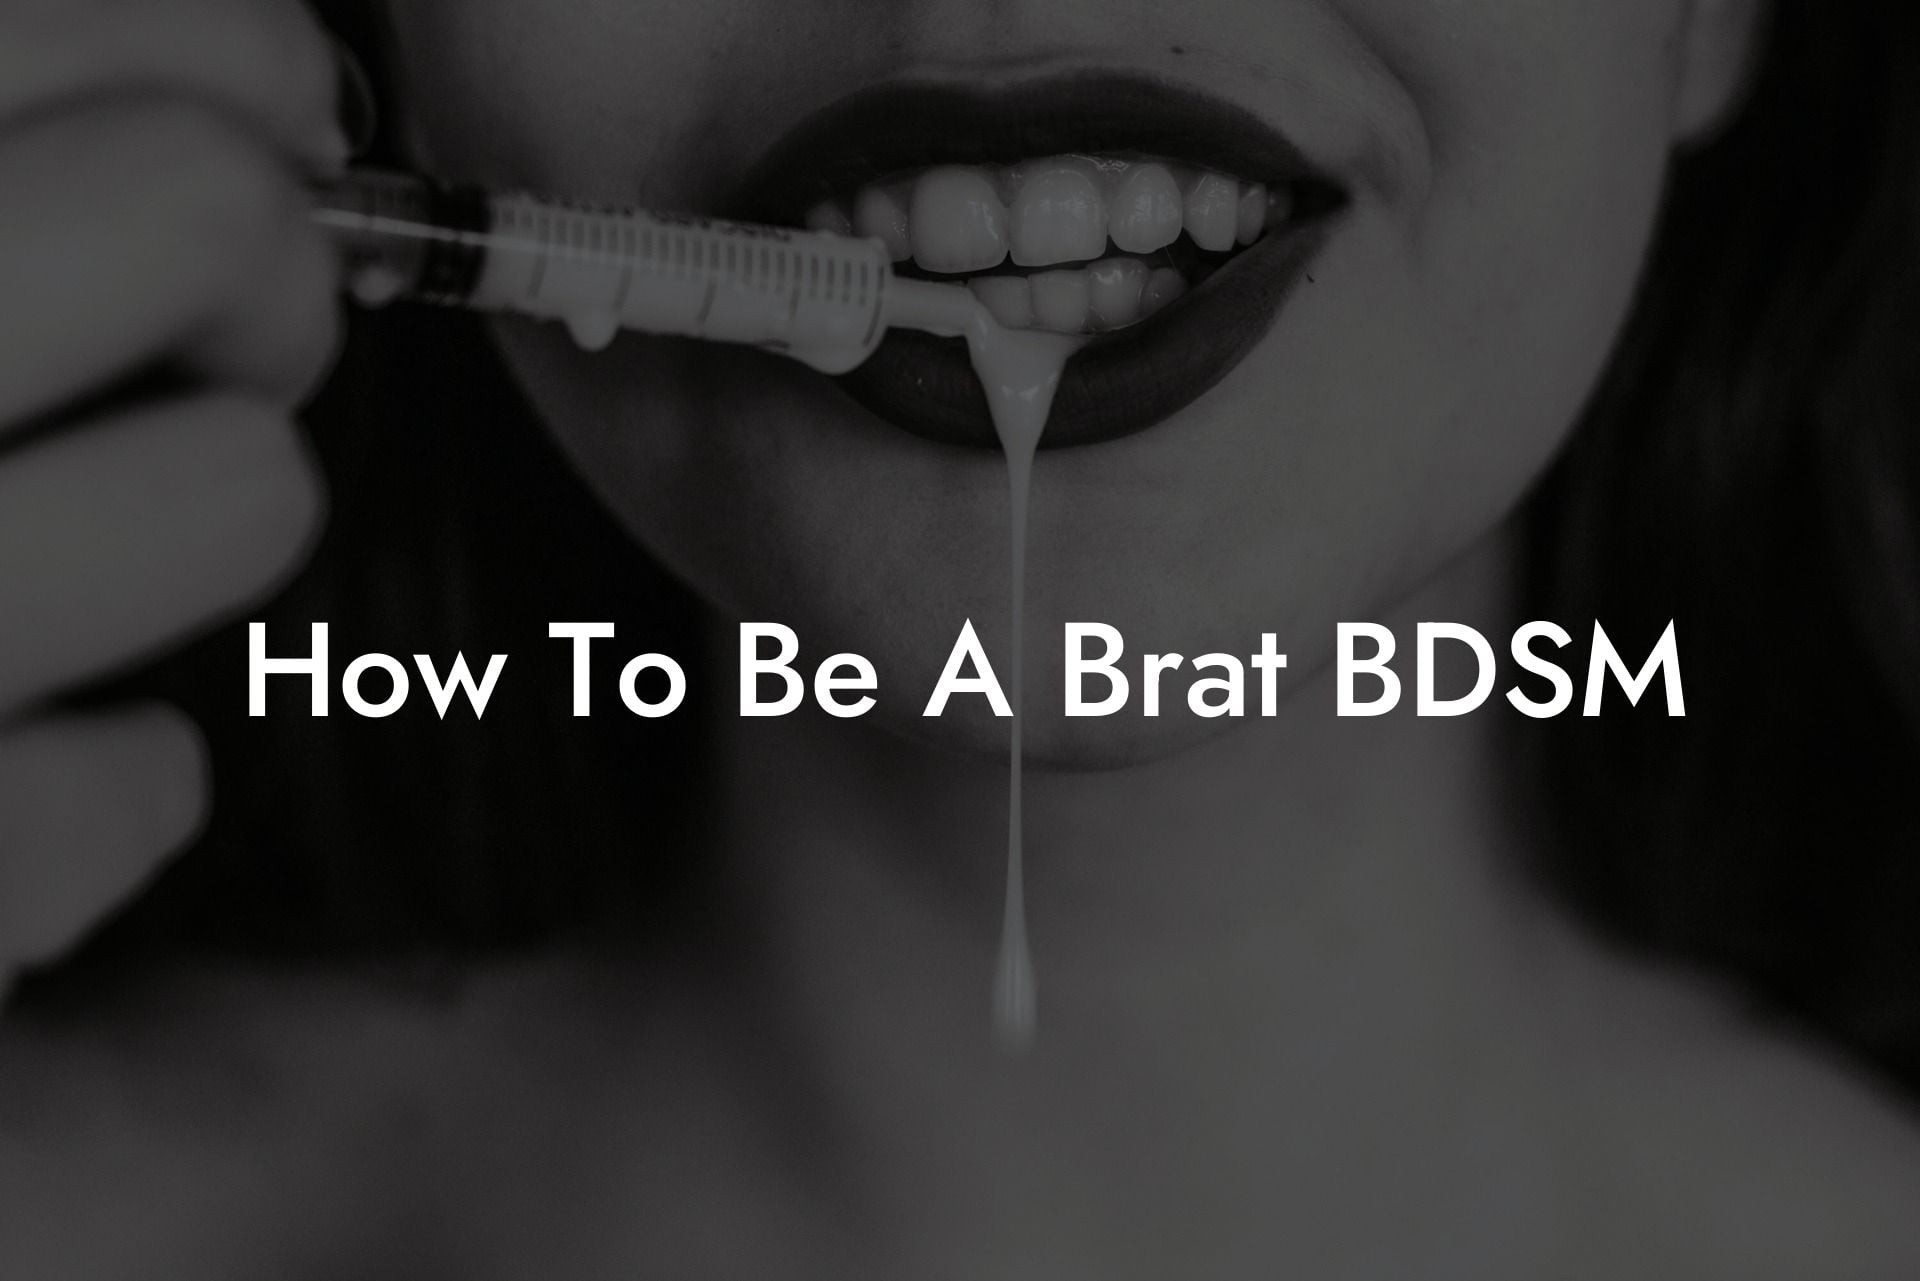 How To Be A Brat BDSM